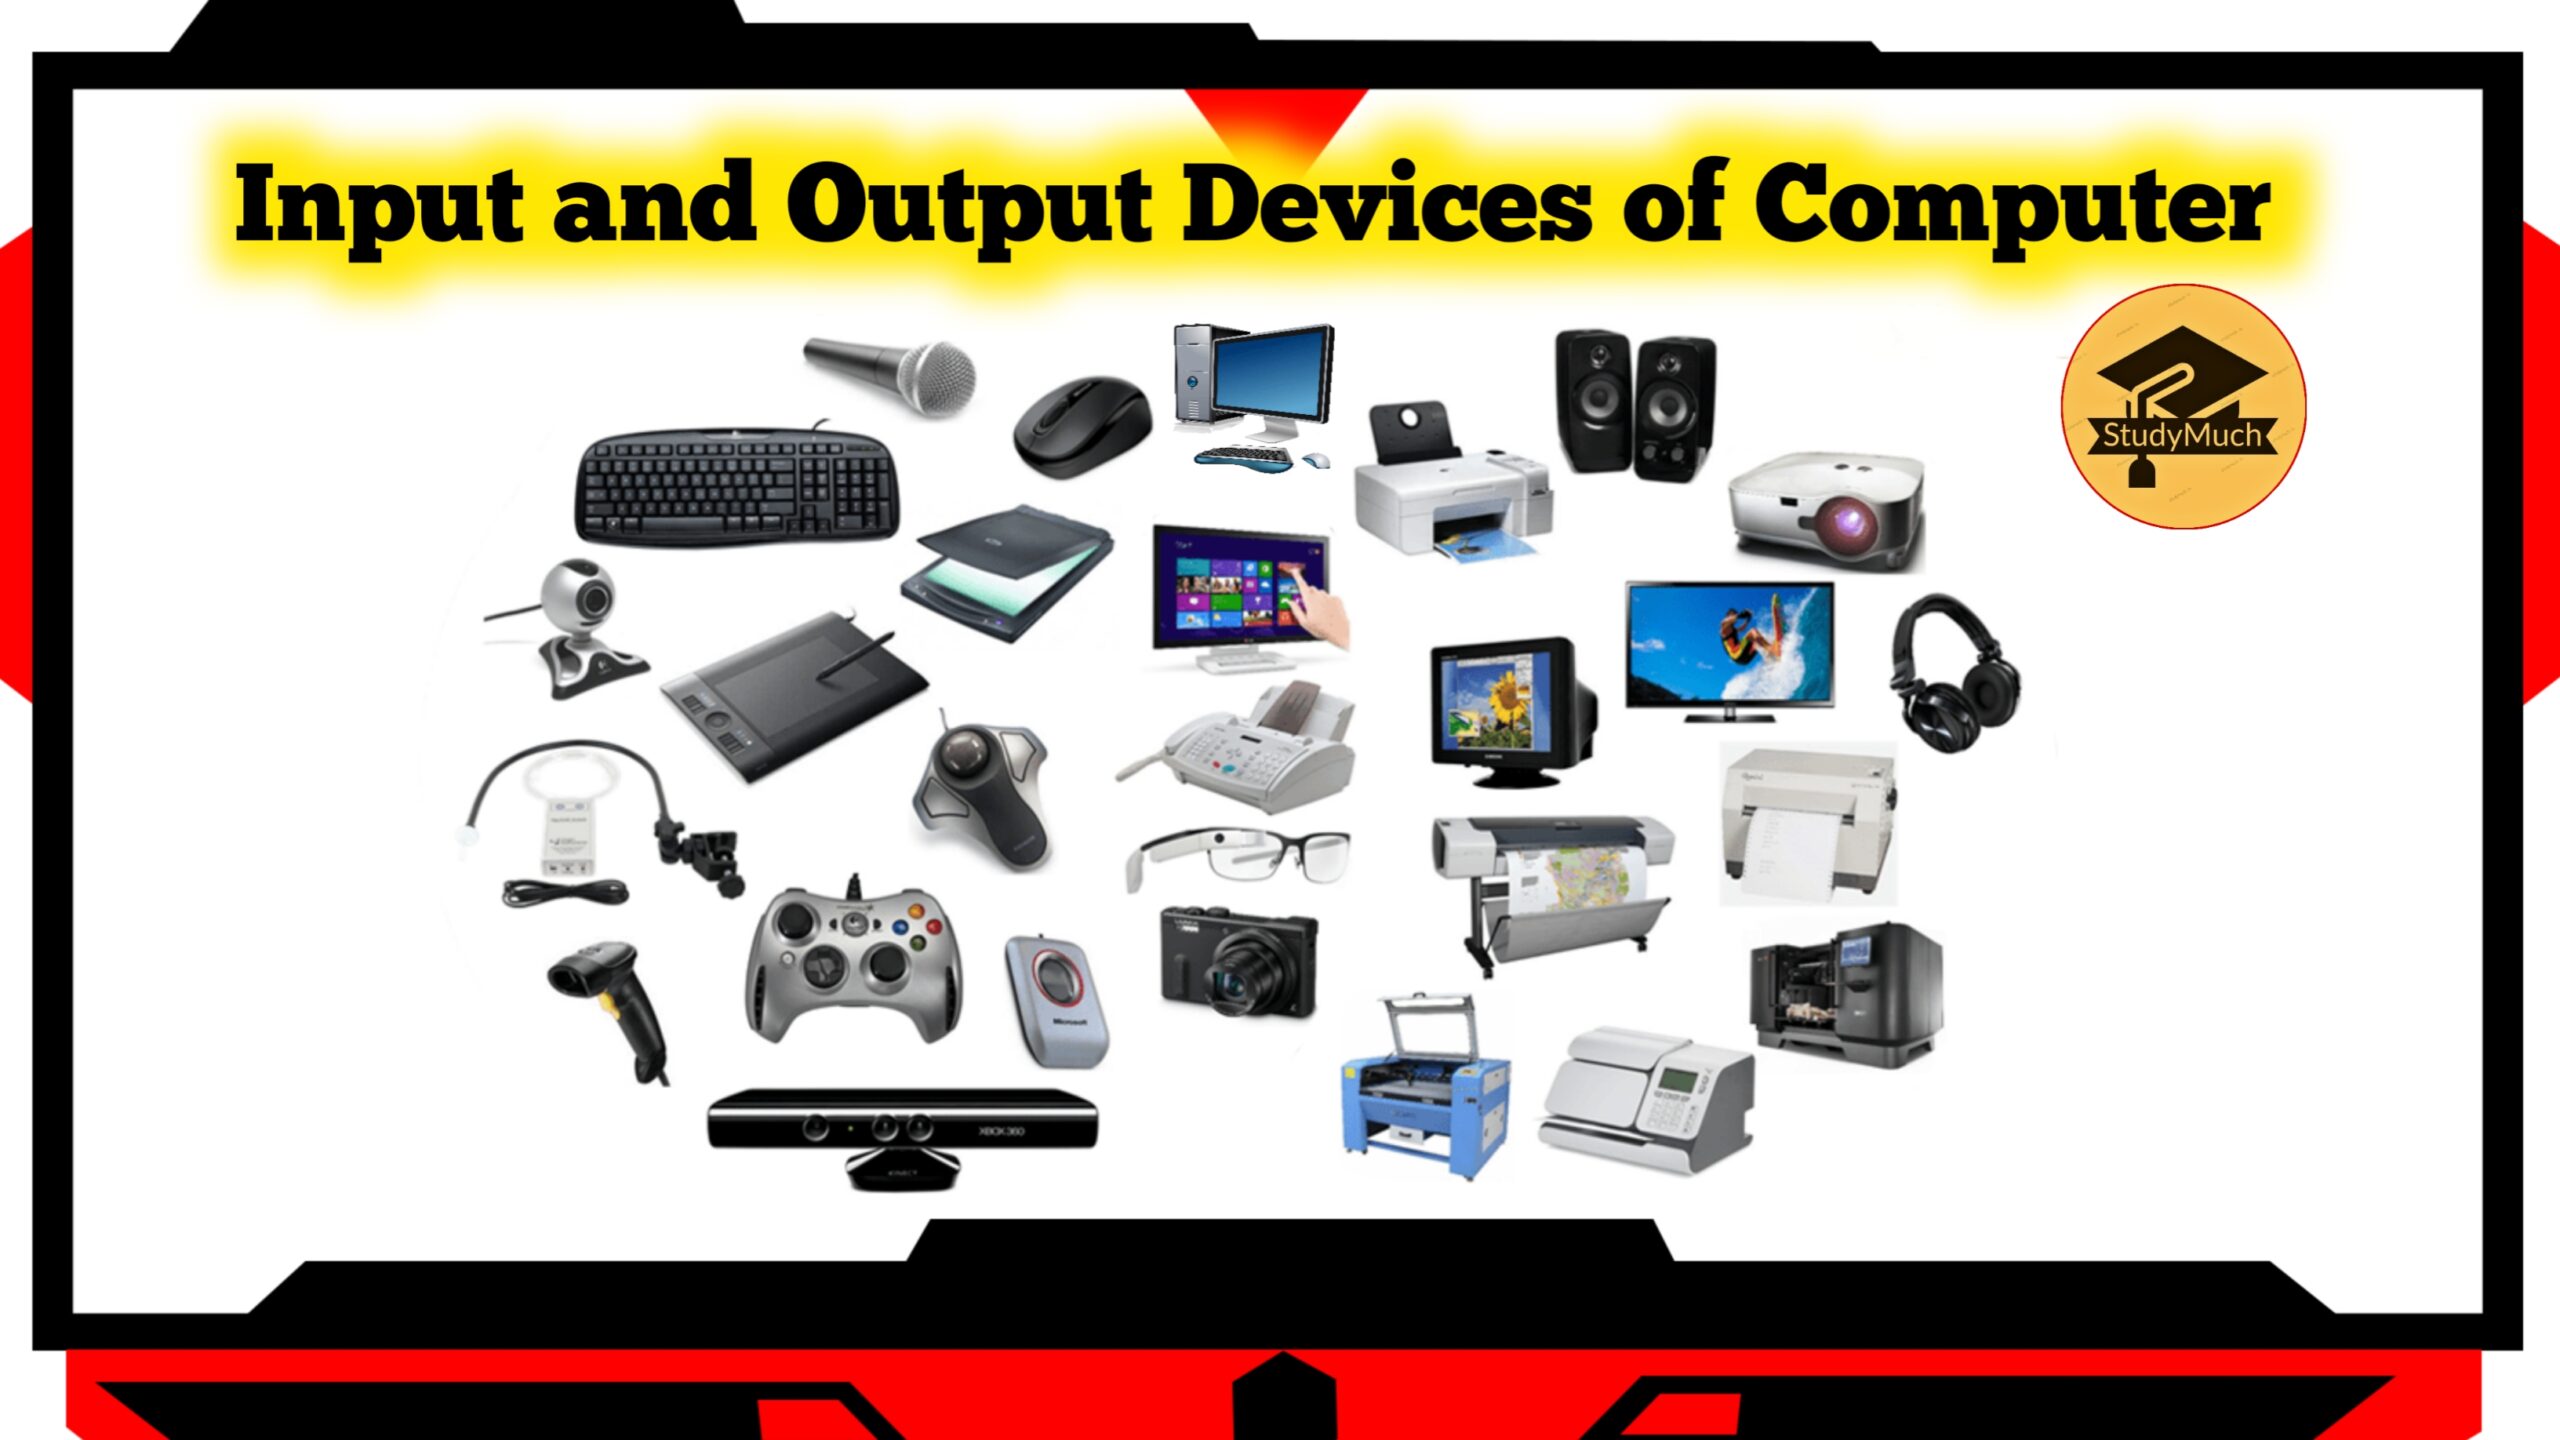 Input Output Devices StudyMuch.in